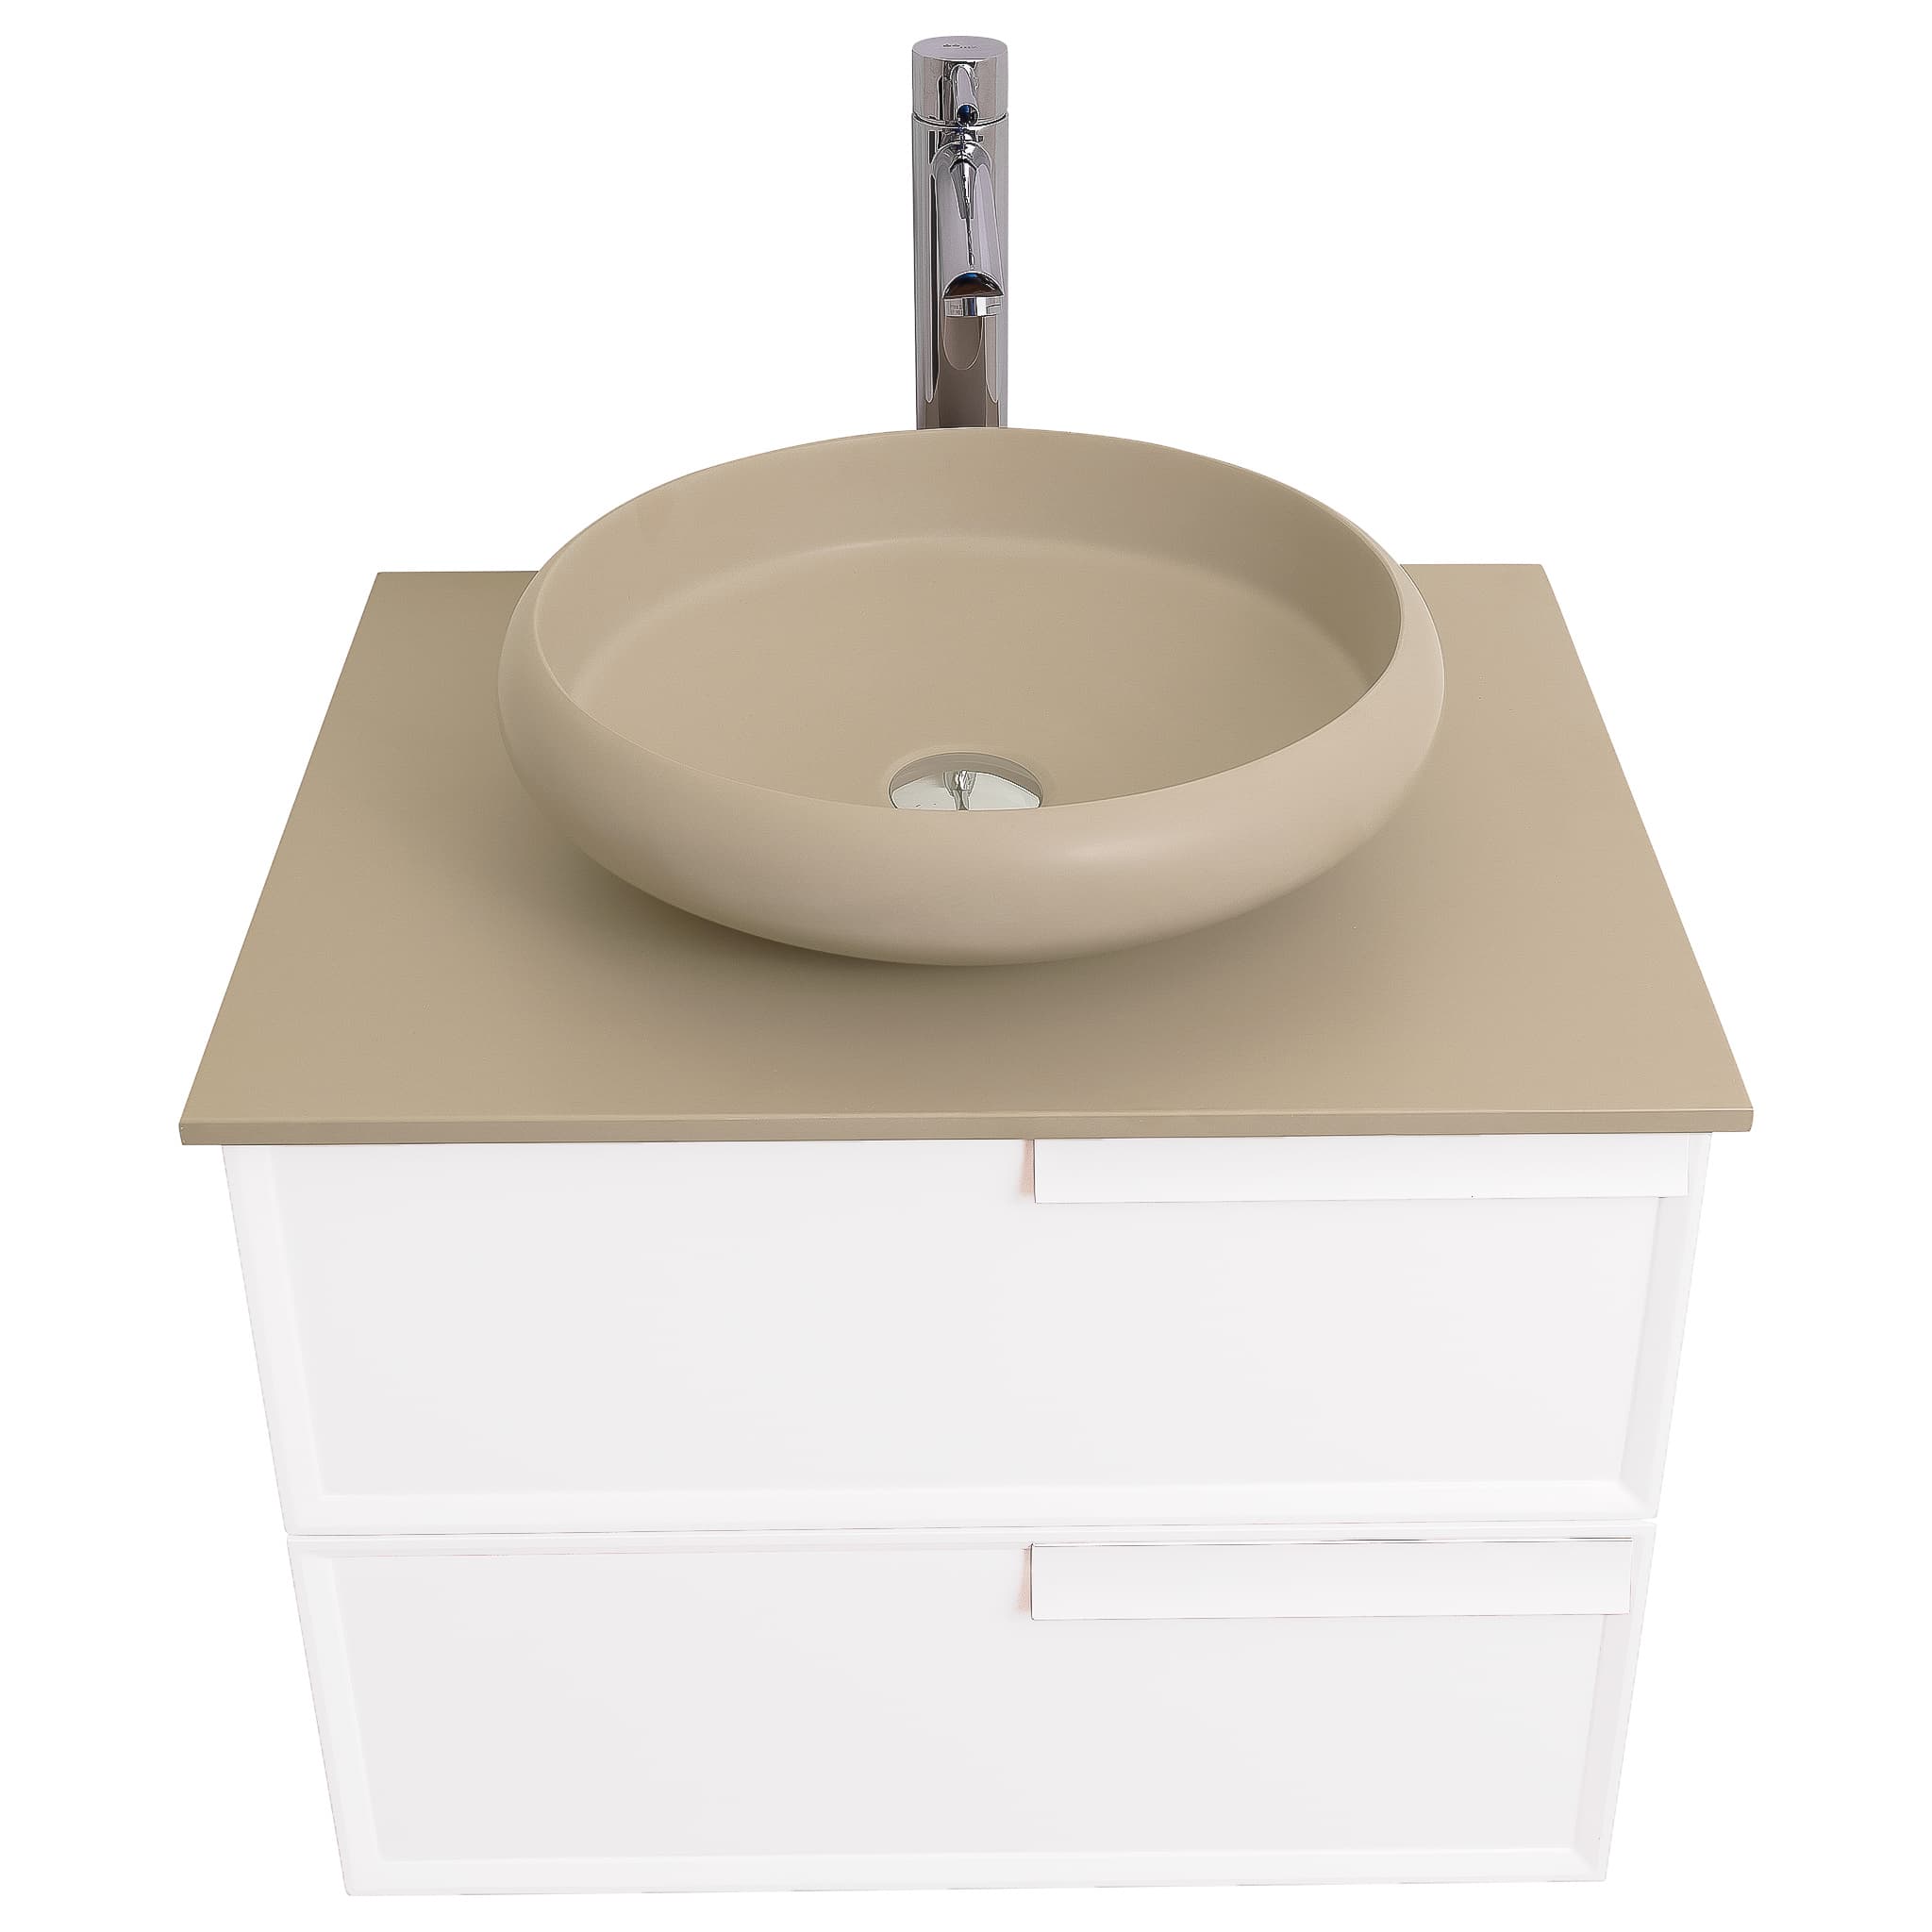 Garda 23.5 Matte White Cabinet, Solid Surface Flat Taupe Counter and Round Solid Surface Taupe Basin 1153, Wall Mounted Modern Vanity Set